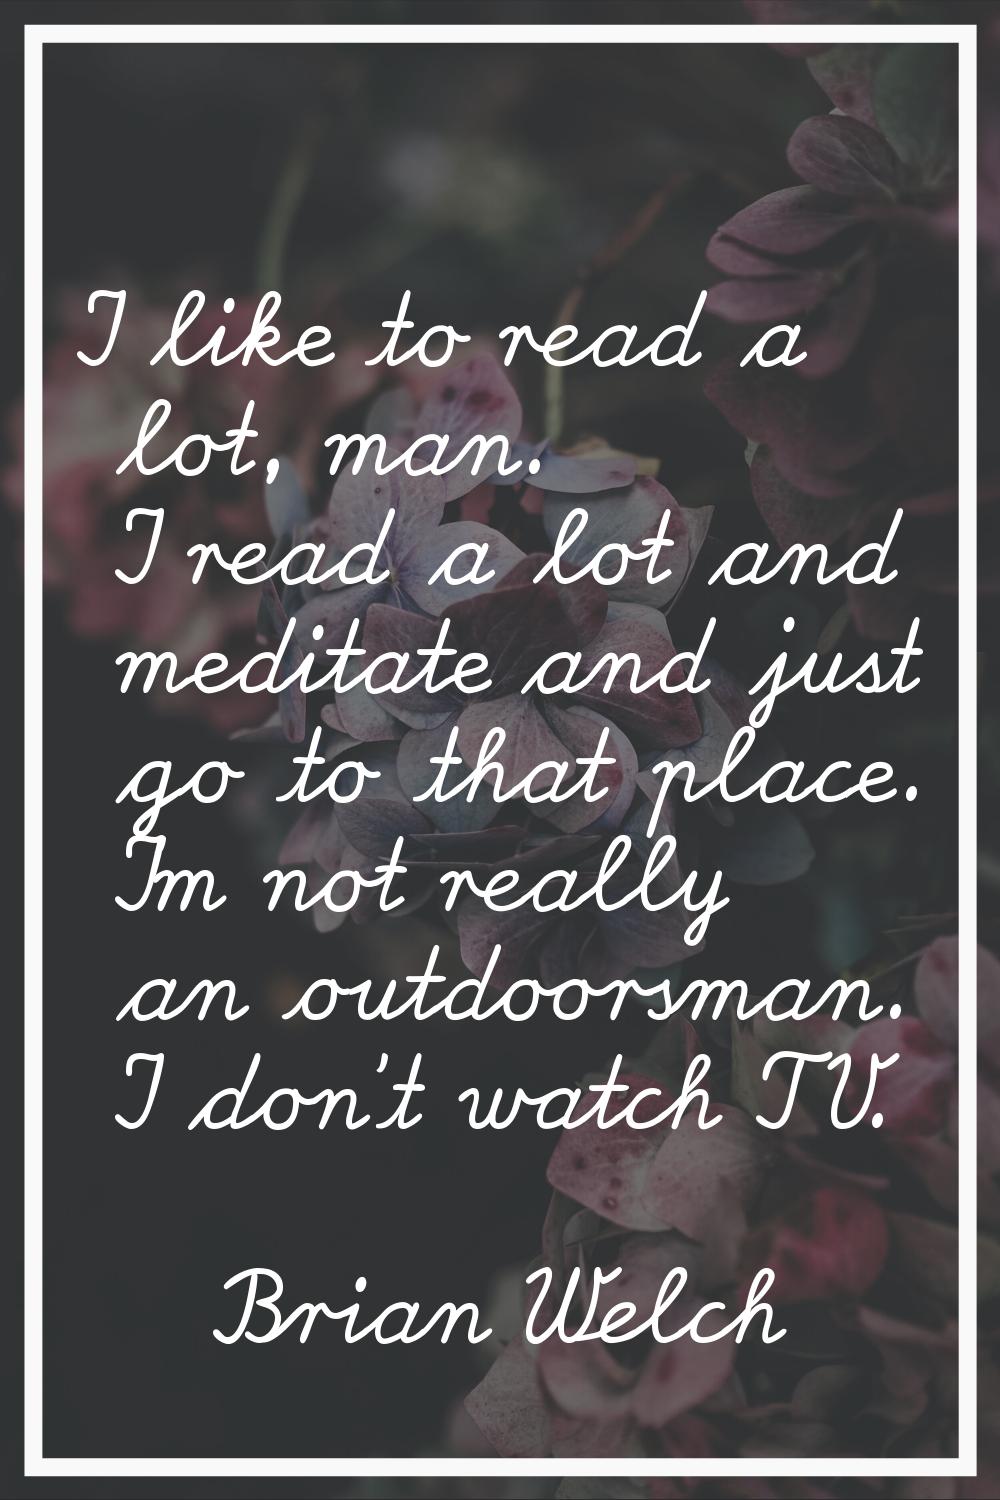 I like to read a lot, man. I read a lot and meditate and just go to that place. I'm not really an o